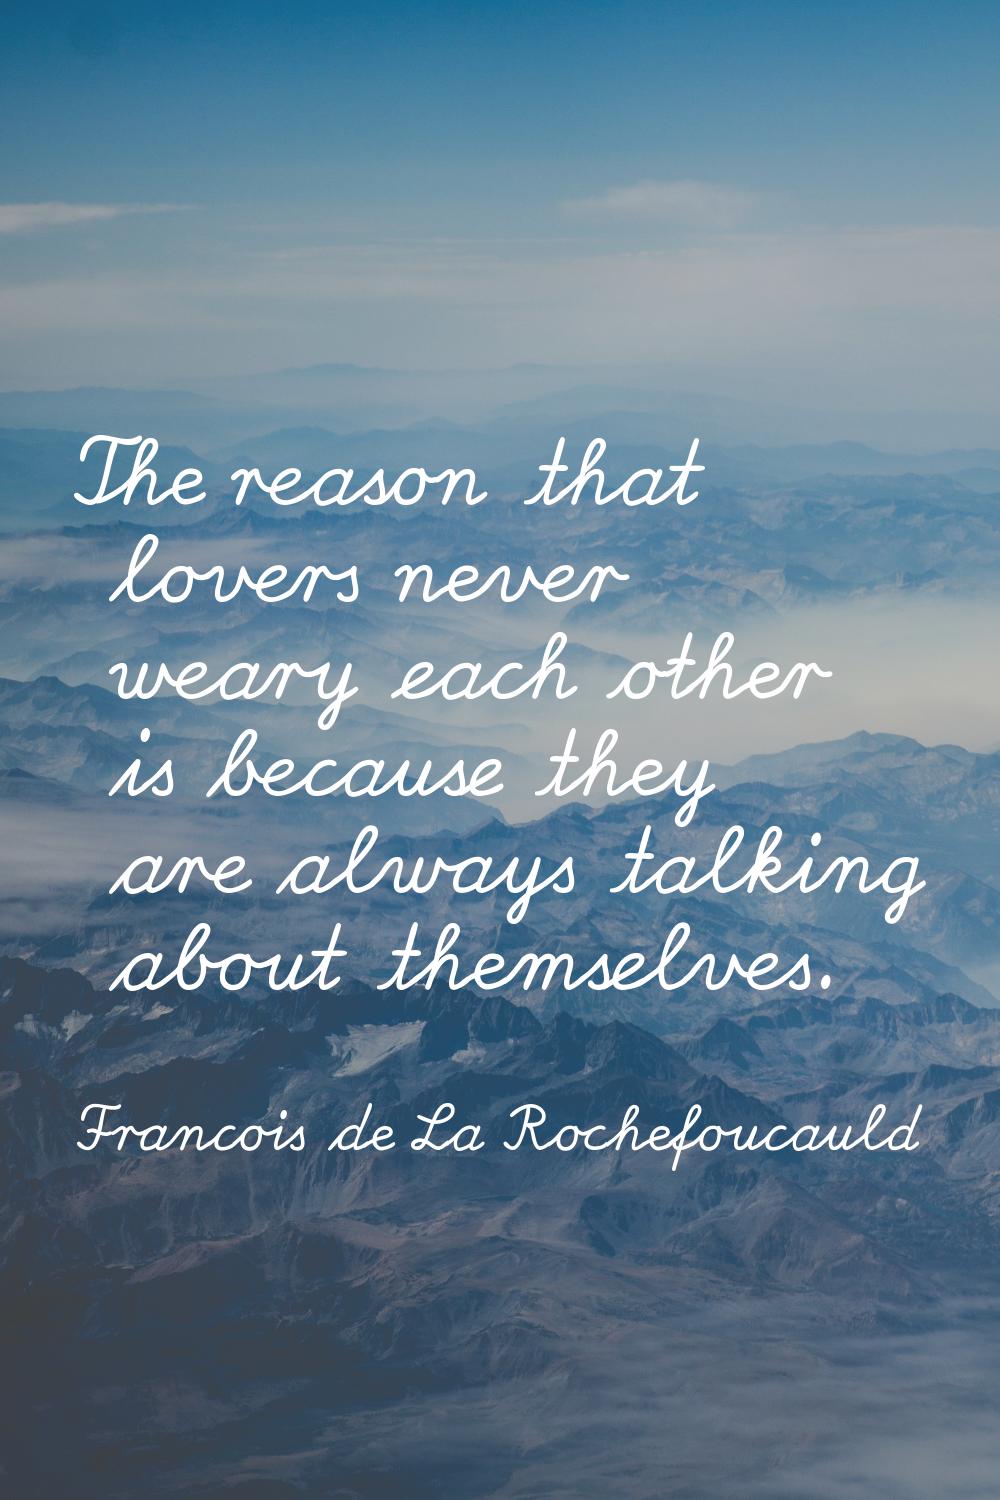 The reason that lovers never weary each other is because they are always talking about themselves.